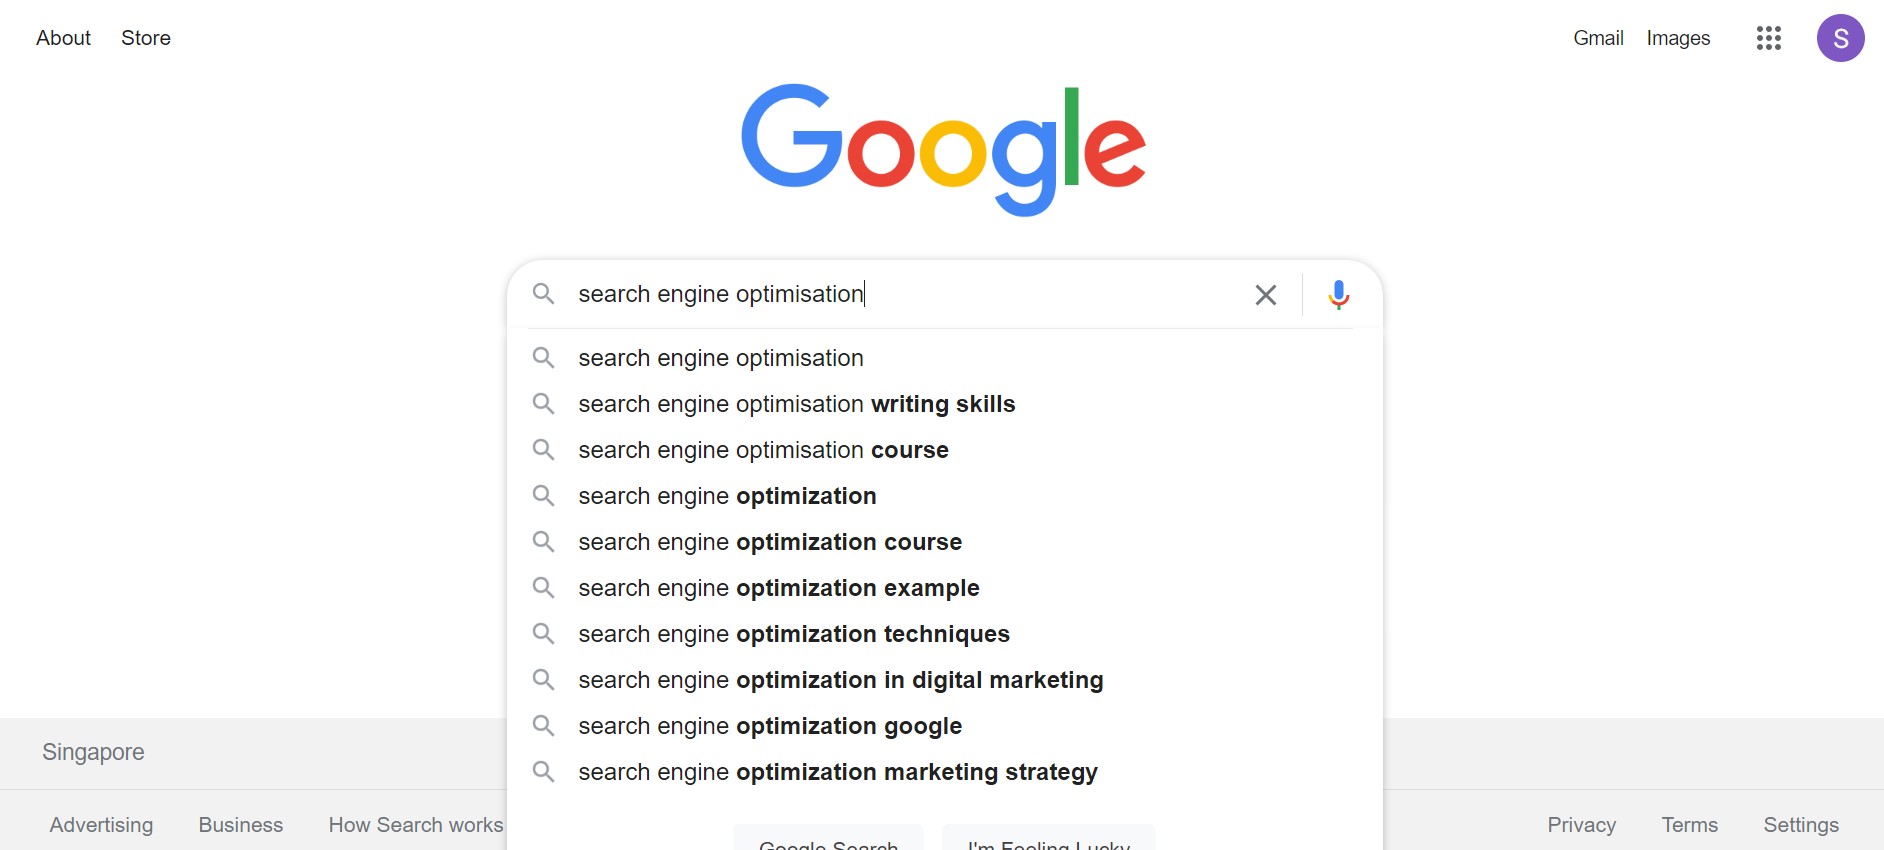 10 Useful Search Engine Optimisation (SEO) Learning Resources